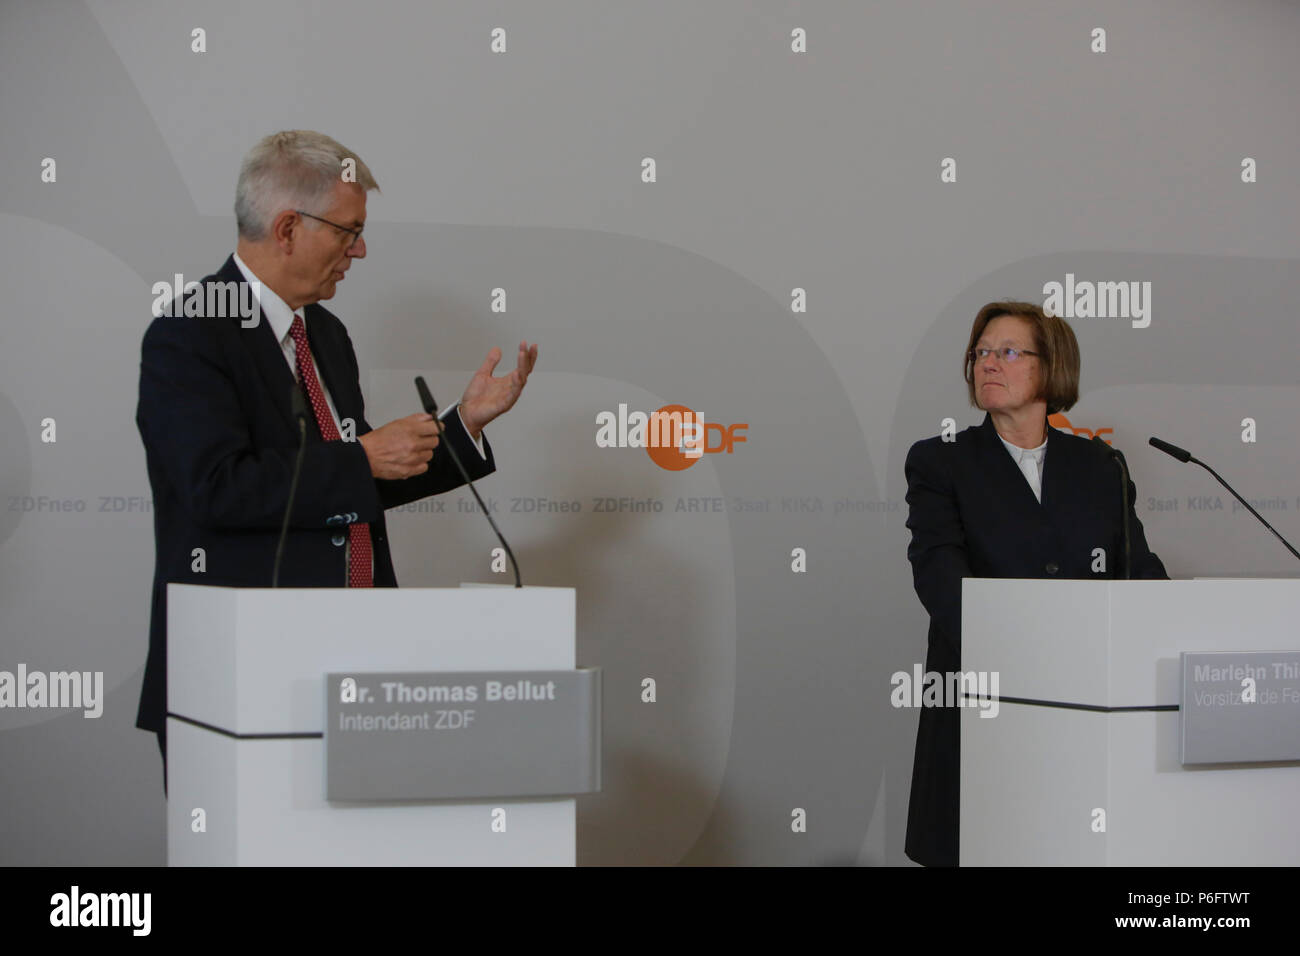 Mainz, Germany. 29th June, 2018. Thomas Bellut (left), the director general (Intendant) of the ZDF, and Marlehn Thieme (right), the chairwoman of the ZDF Television Board (ZDF-Fernsehrat), are pictured at the press-conference. The Television Board of the German public-service television broadcaster ZDF (Zweites Deutsches Fernsehen) met for their 9. meeting of its XV. term of office in Mainz. The chairwoman of the Television Board Marlehn Thieme was re-elected to her position in the scheduled midterm election of the 3 seats of the presidium. Credit: Michael Debets/Pacific Press/Alamy Live News Stock Photo